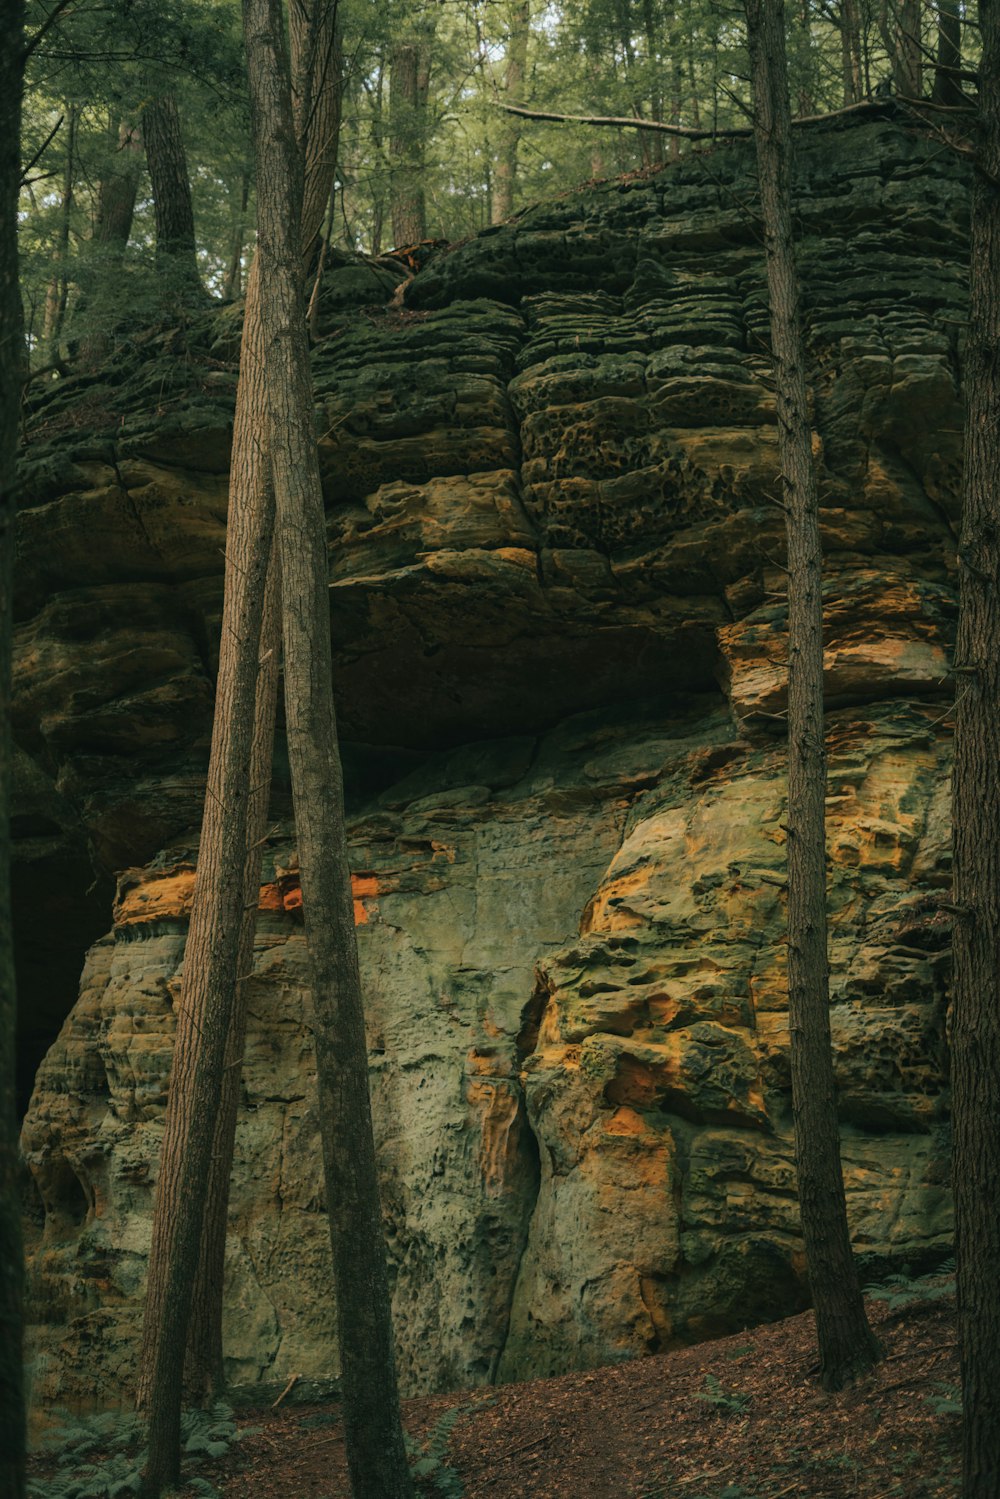 a large rock formation in the middle of a forest